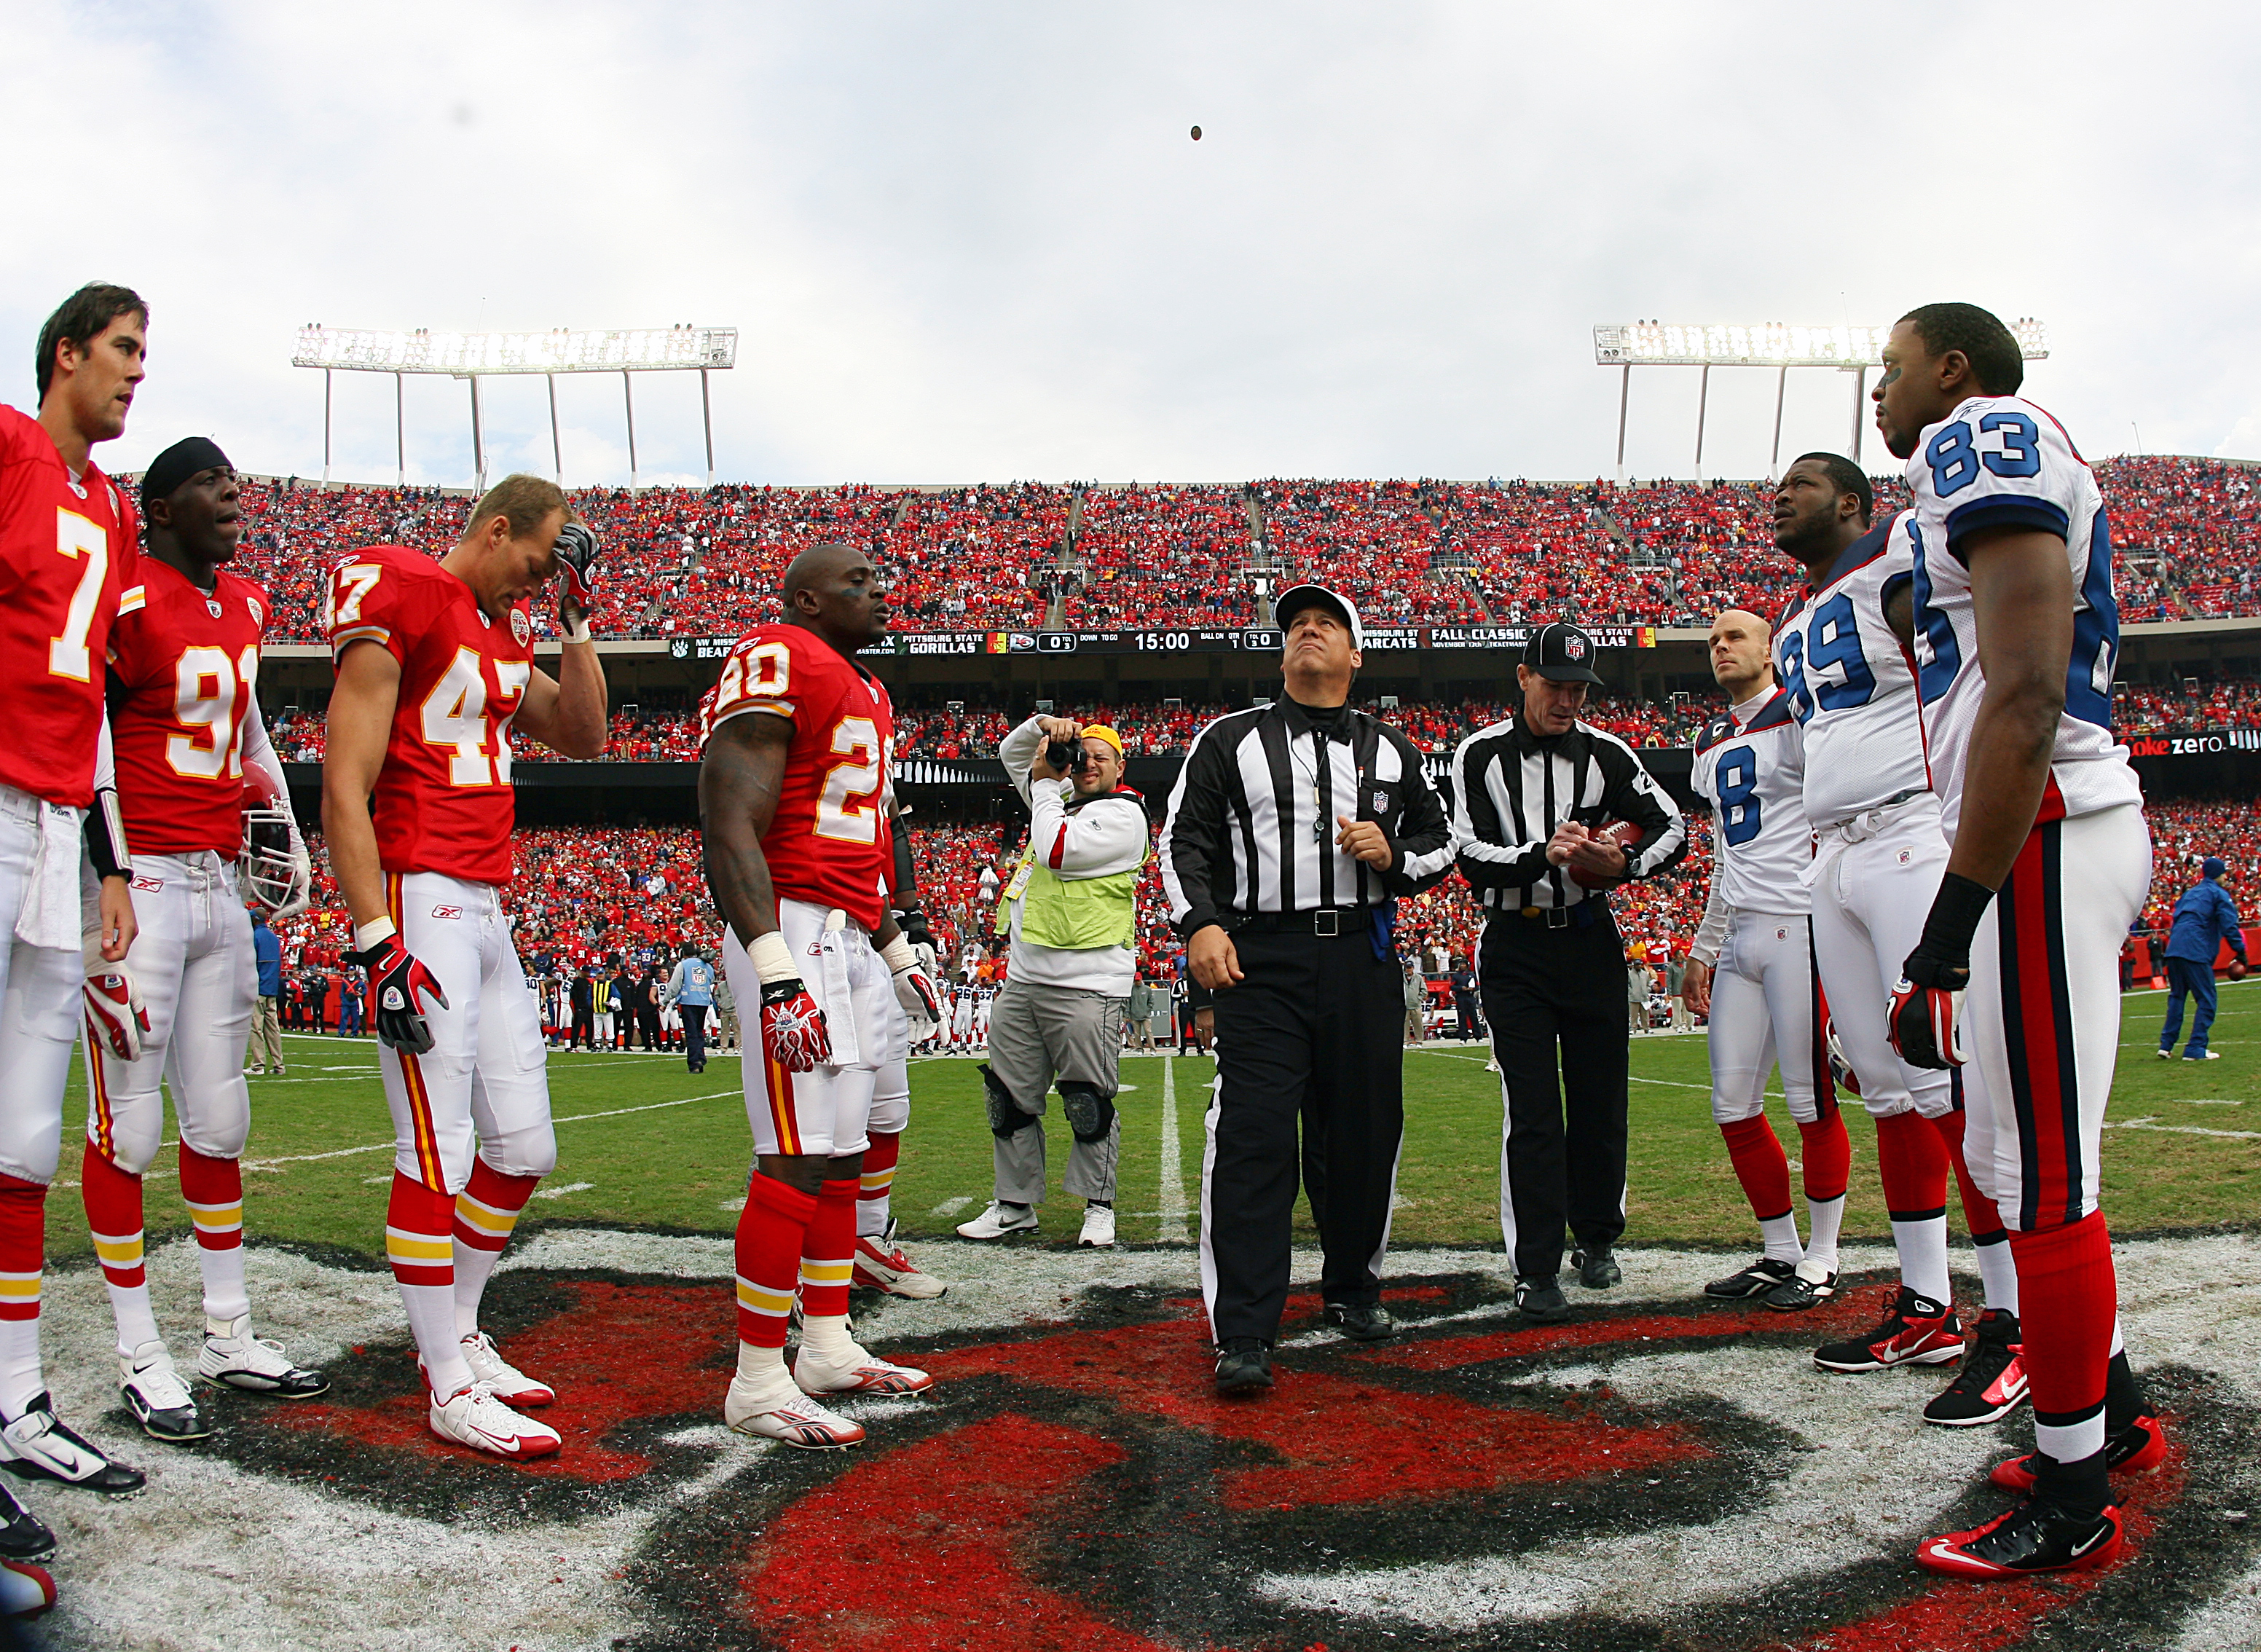 Team captains for the Kansas City Chiefs and the Buffalo Bills meet for the coin toss before a game on October 31, 2010 at Arrowhead Stadium in Kansas City, Missouri. The Chiefs won 13-10.